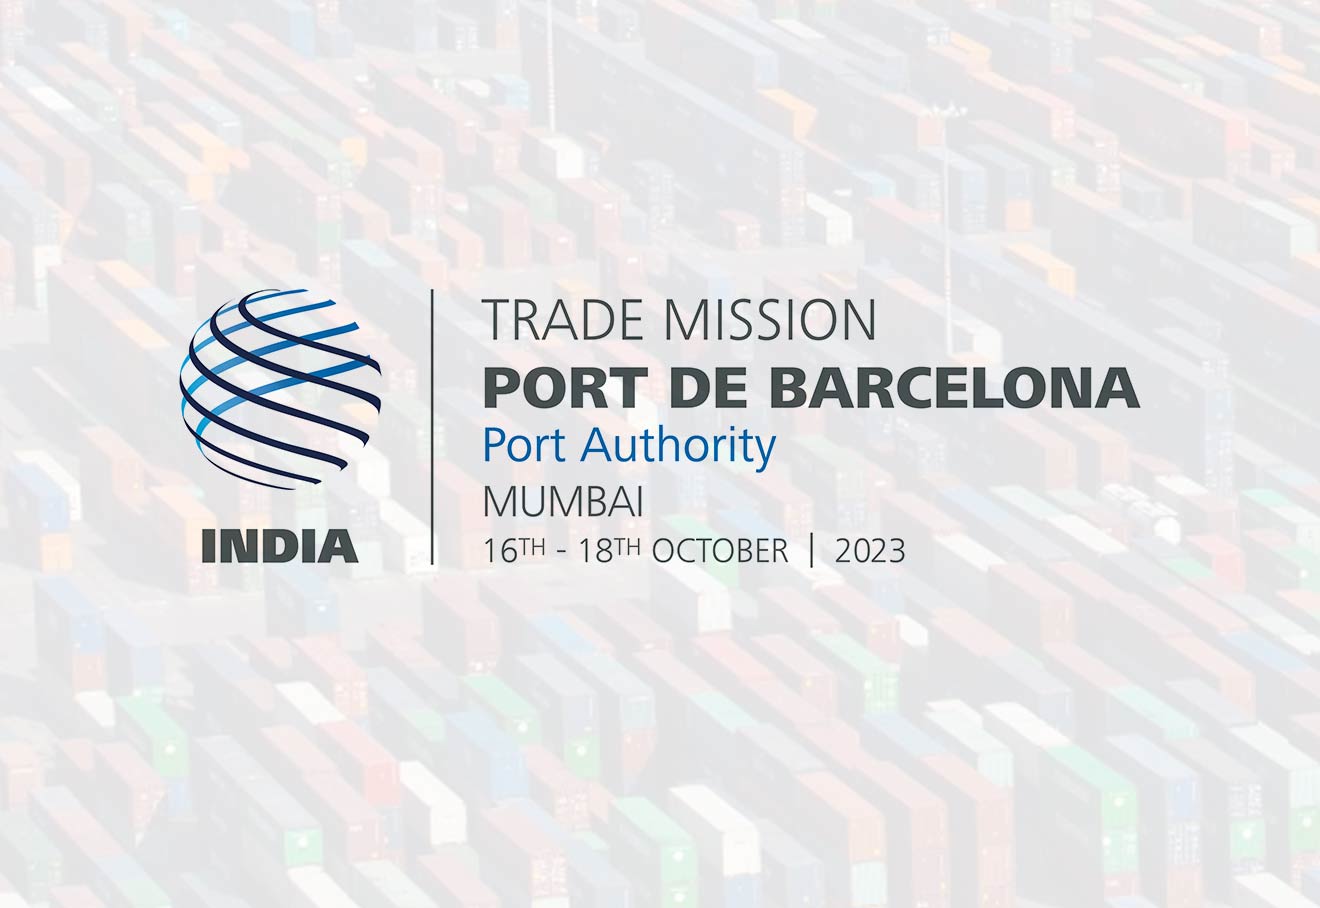 Port Of Barcelona Trade Mission Scheduled In Mumbai From Oct 16-18